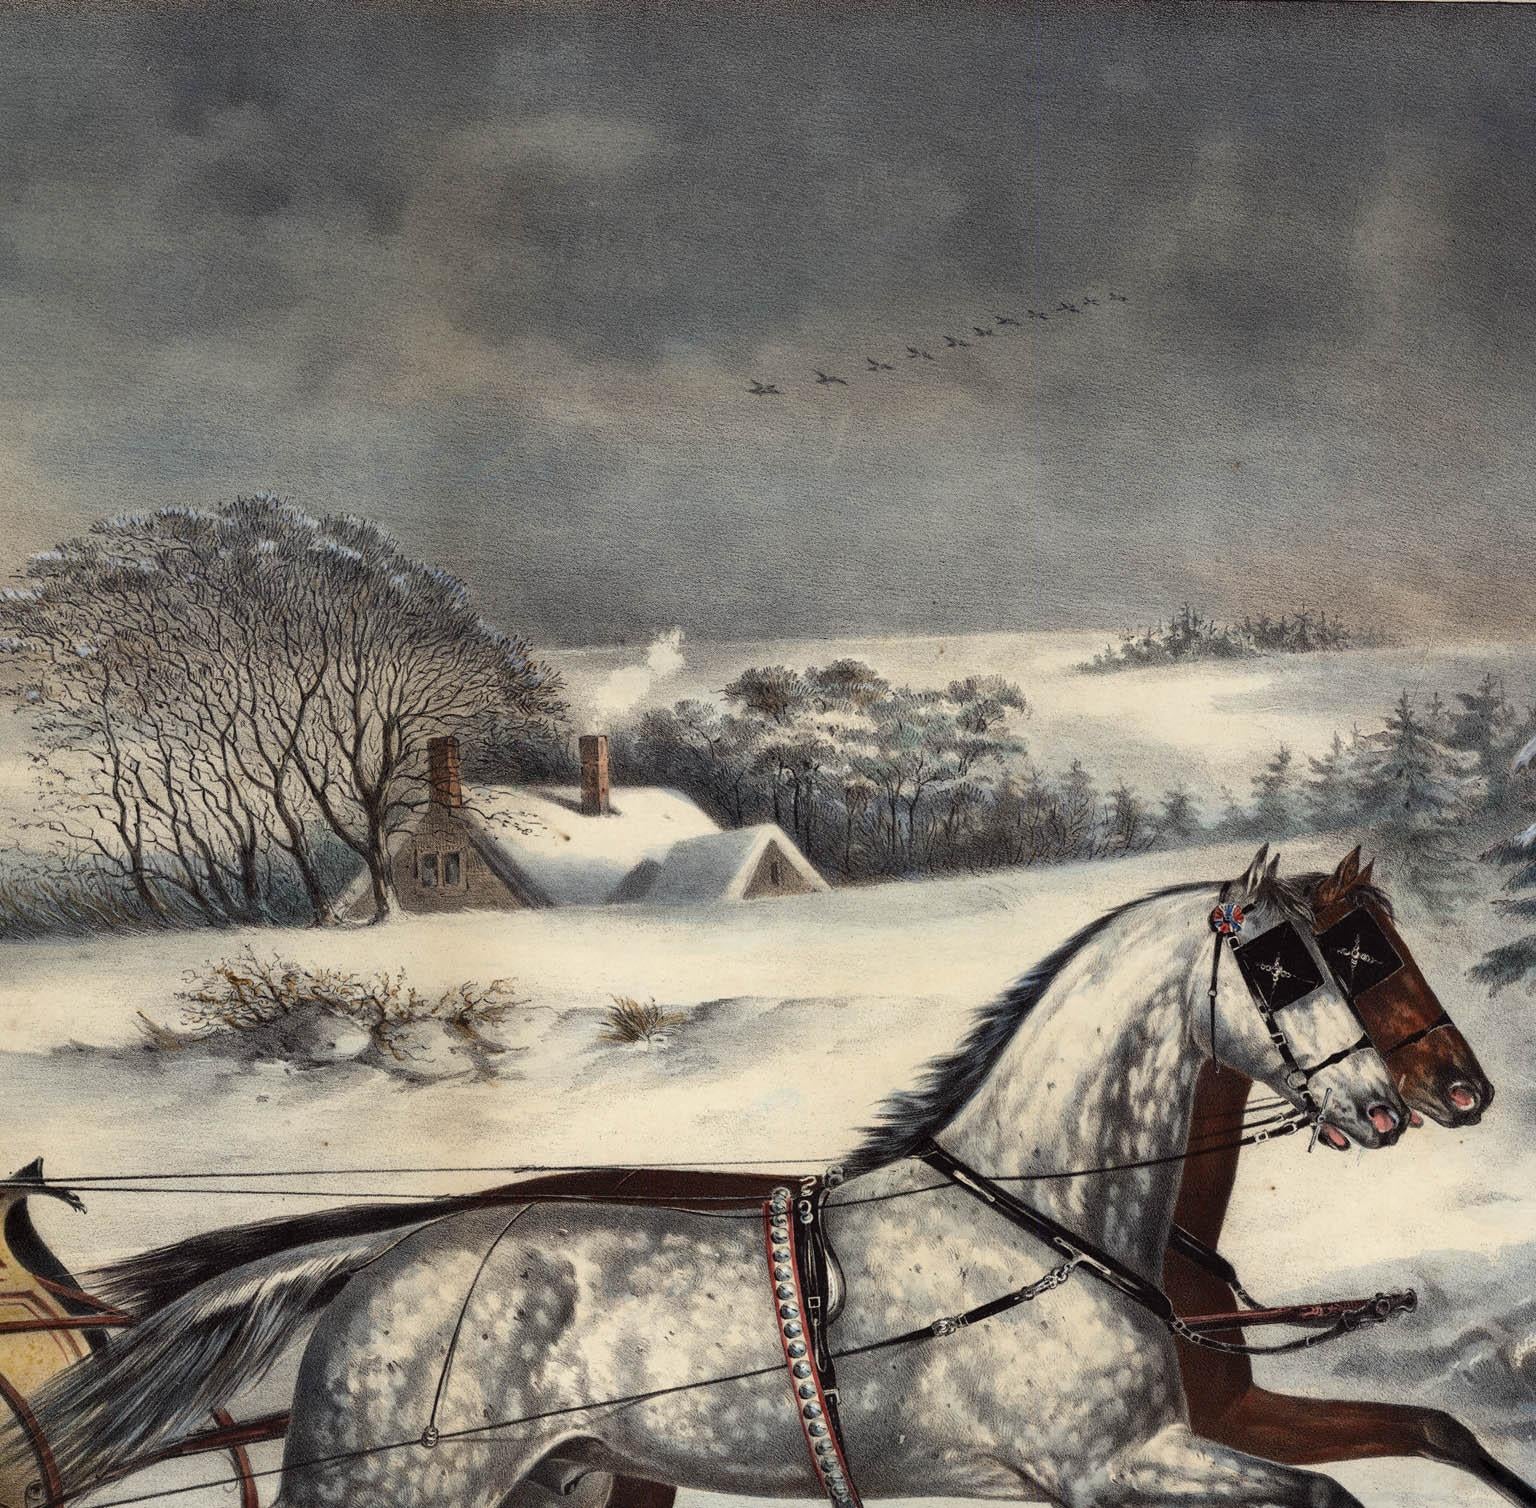 The Road, - Winter.   - American Realist Print by Otto Knirsch